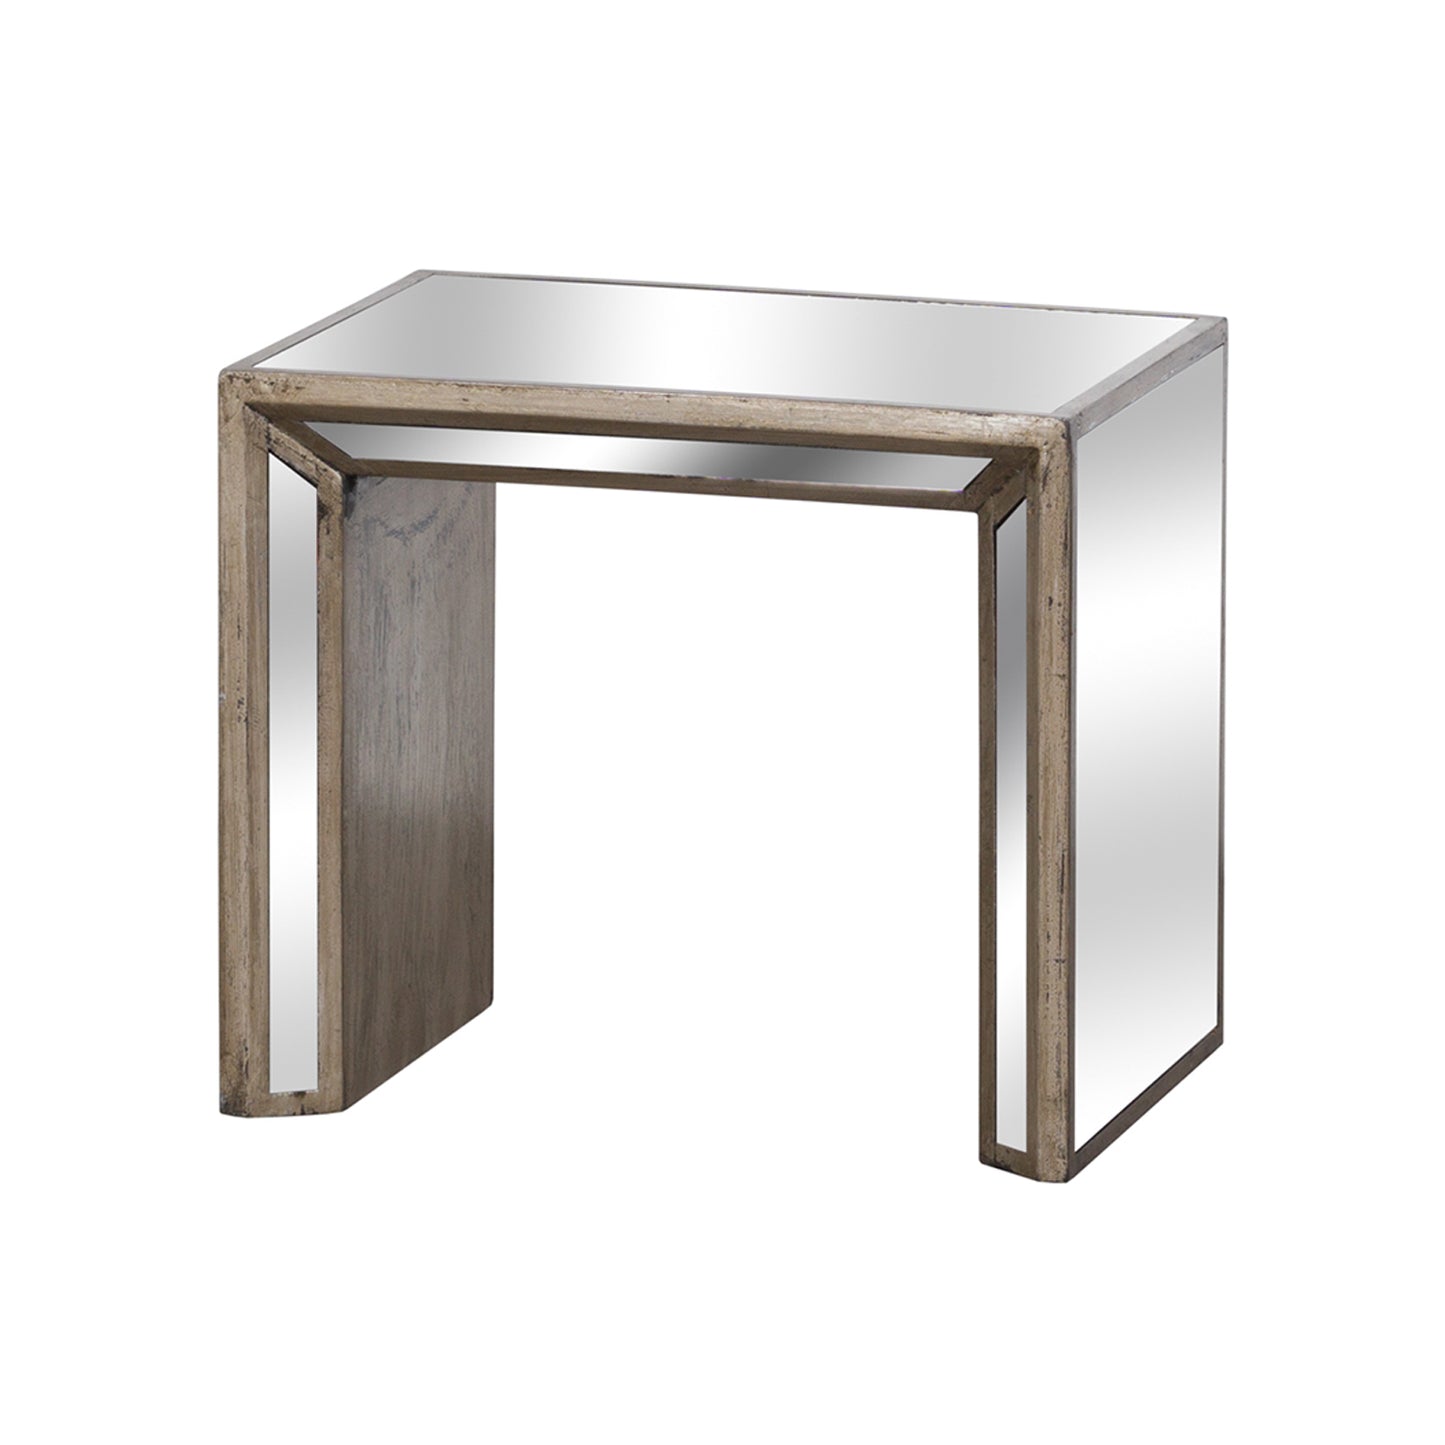 Augustus mirrored nest of tables